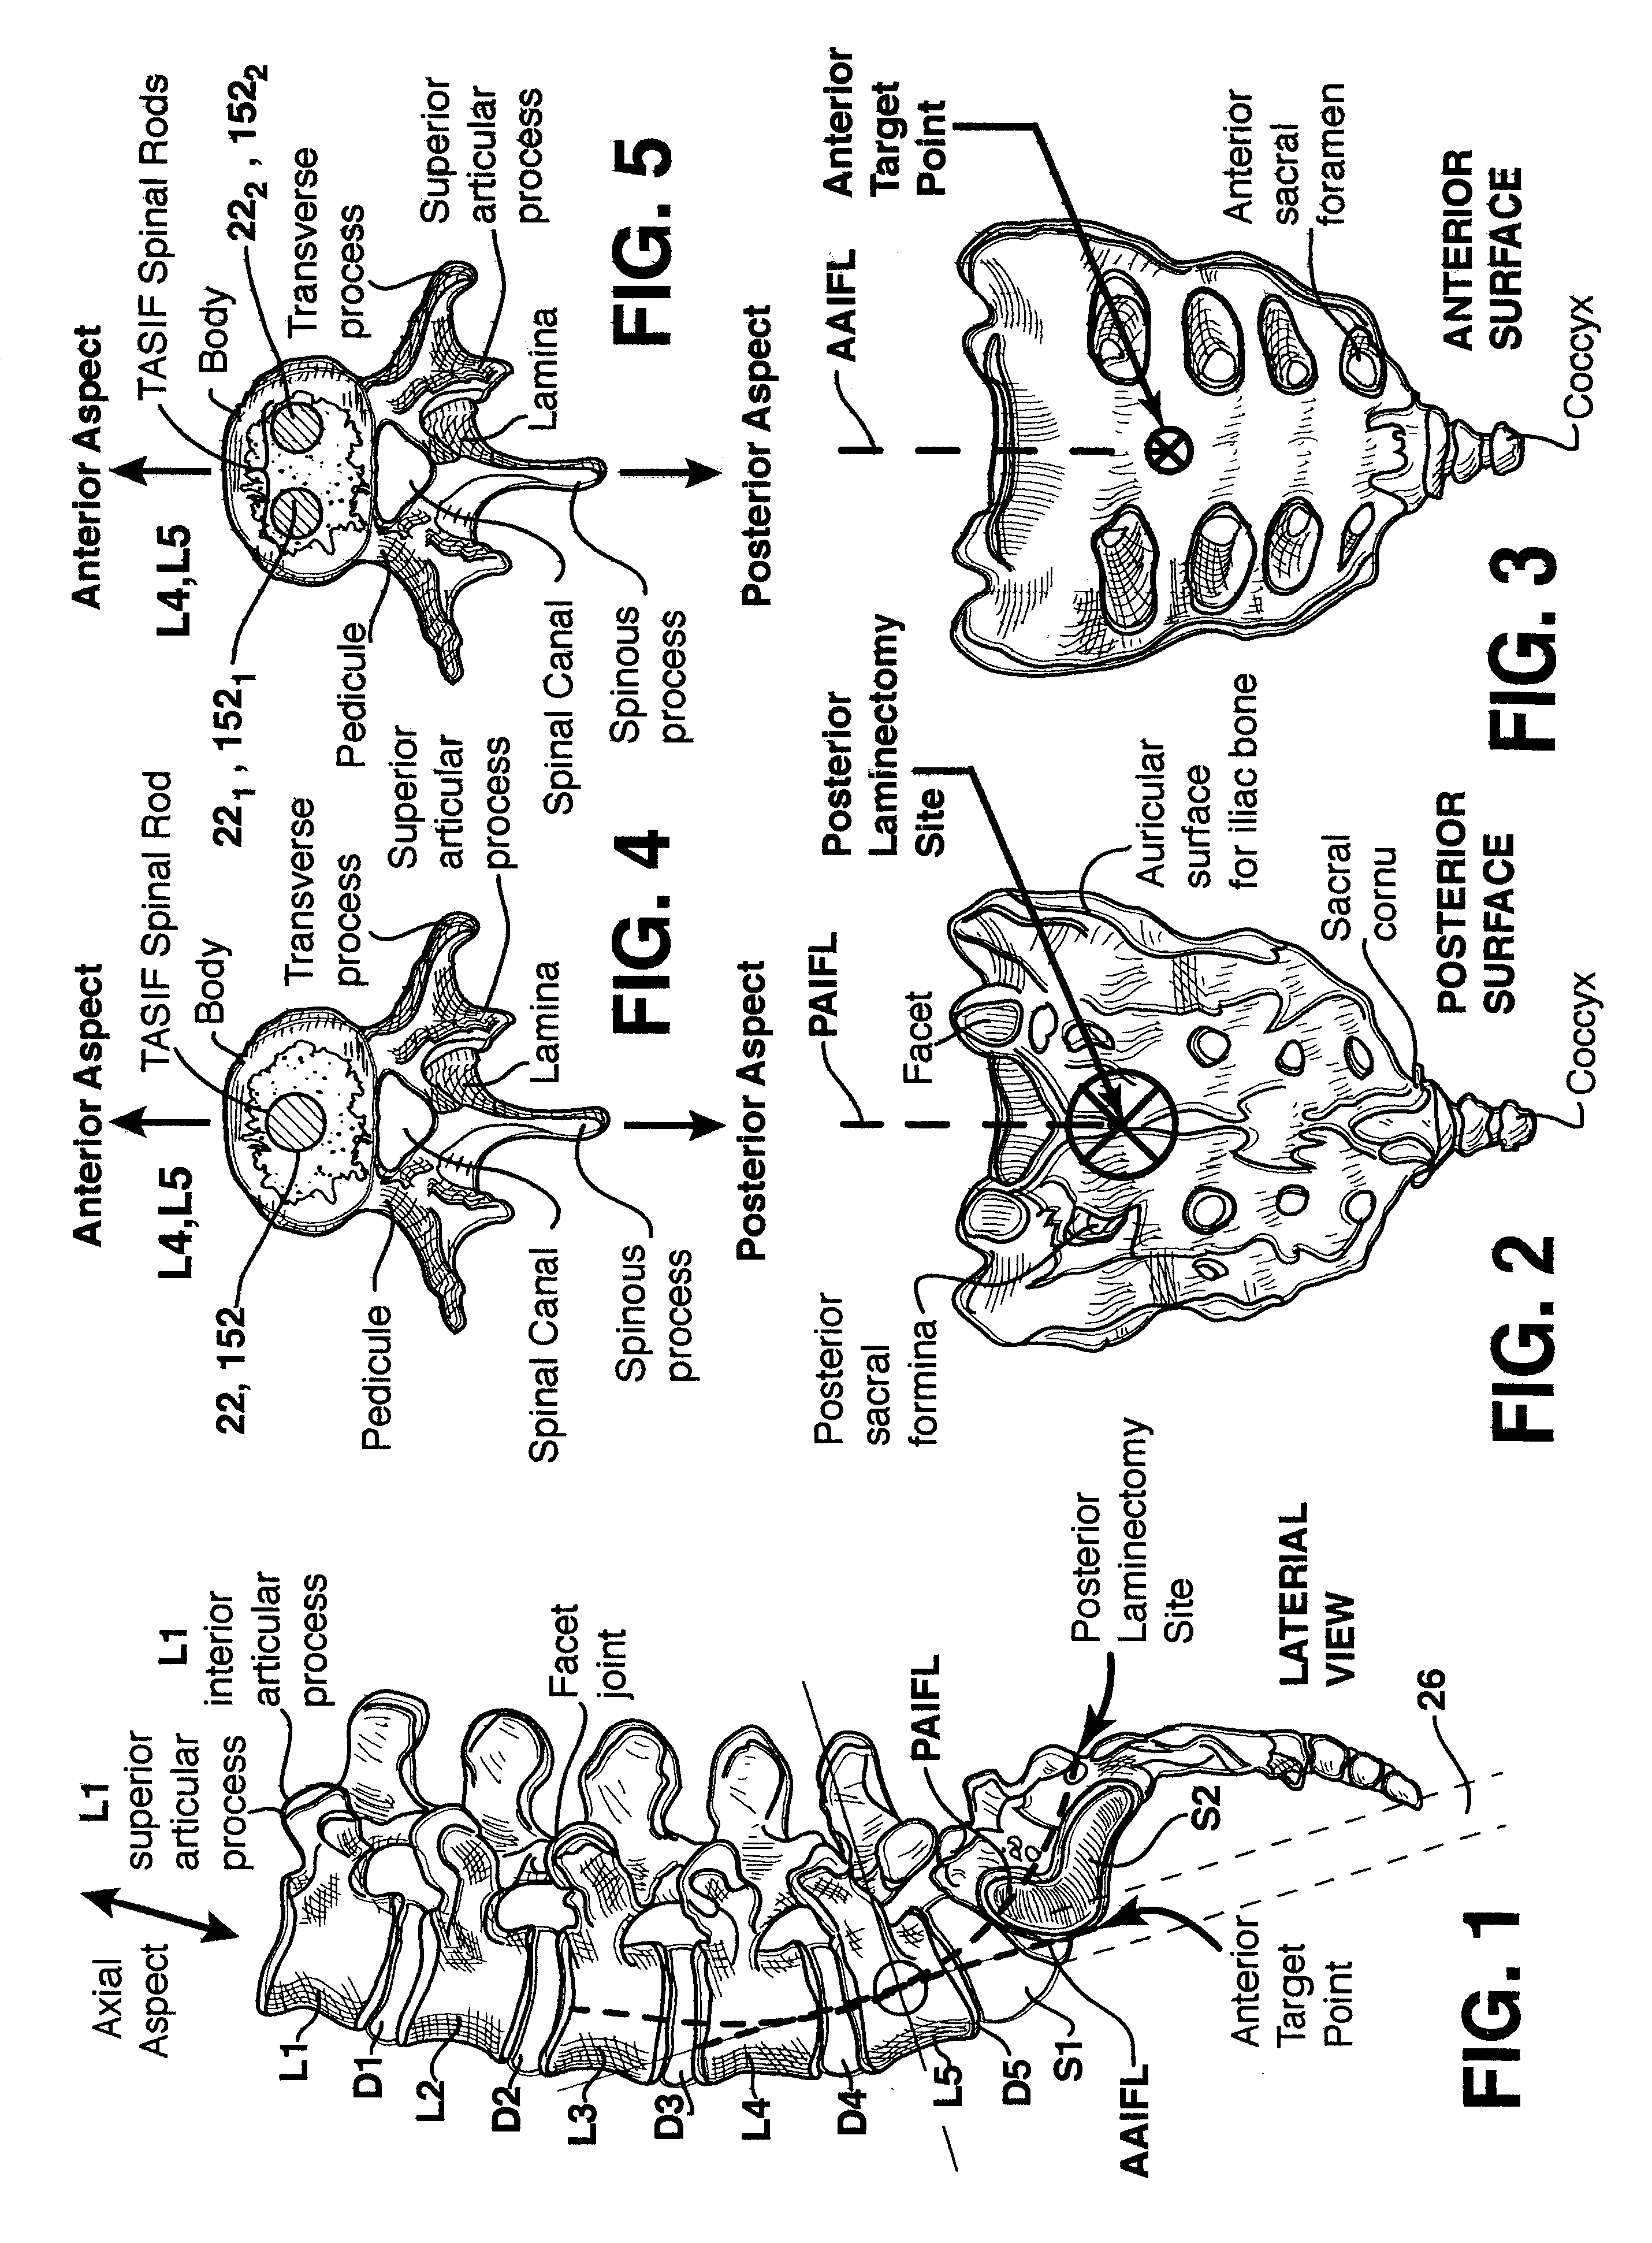 Methods and apparatus for forming shaped axial bores through spinal vertebrae